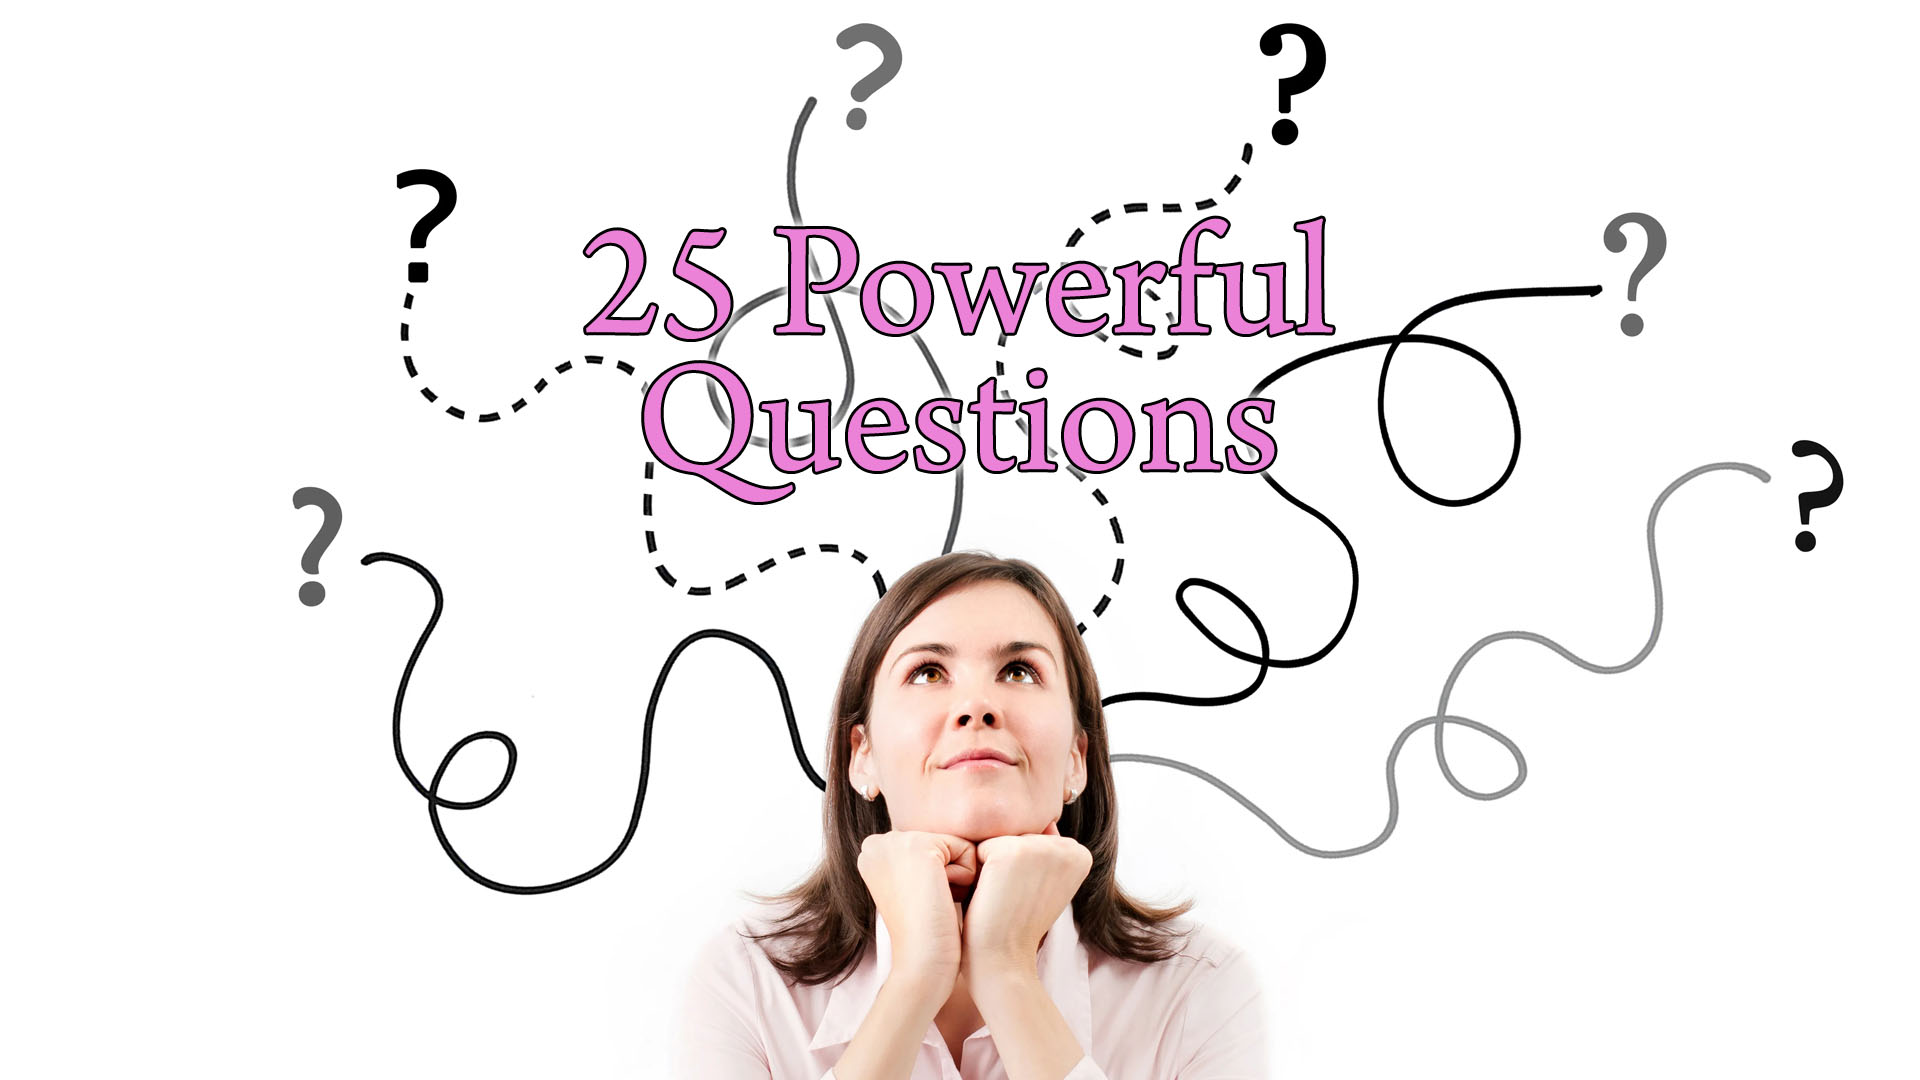 25 Powerful Questions